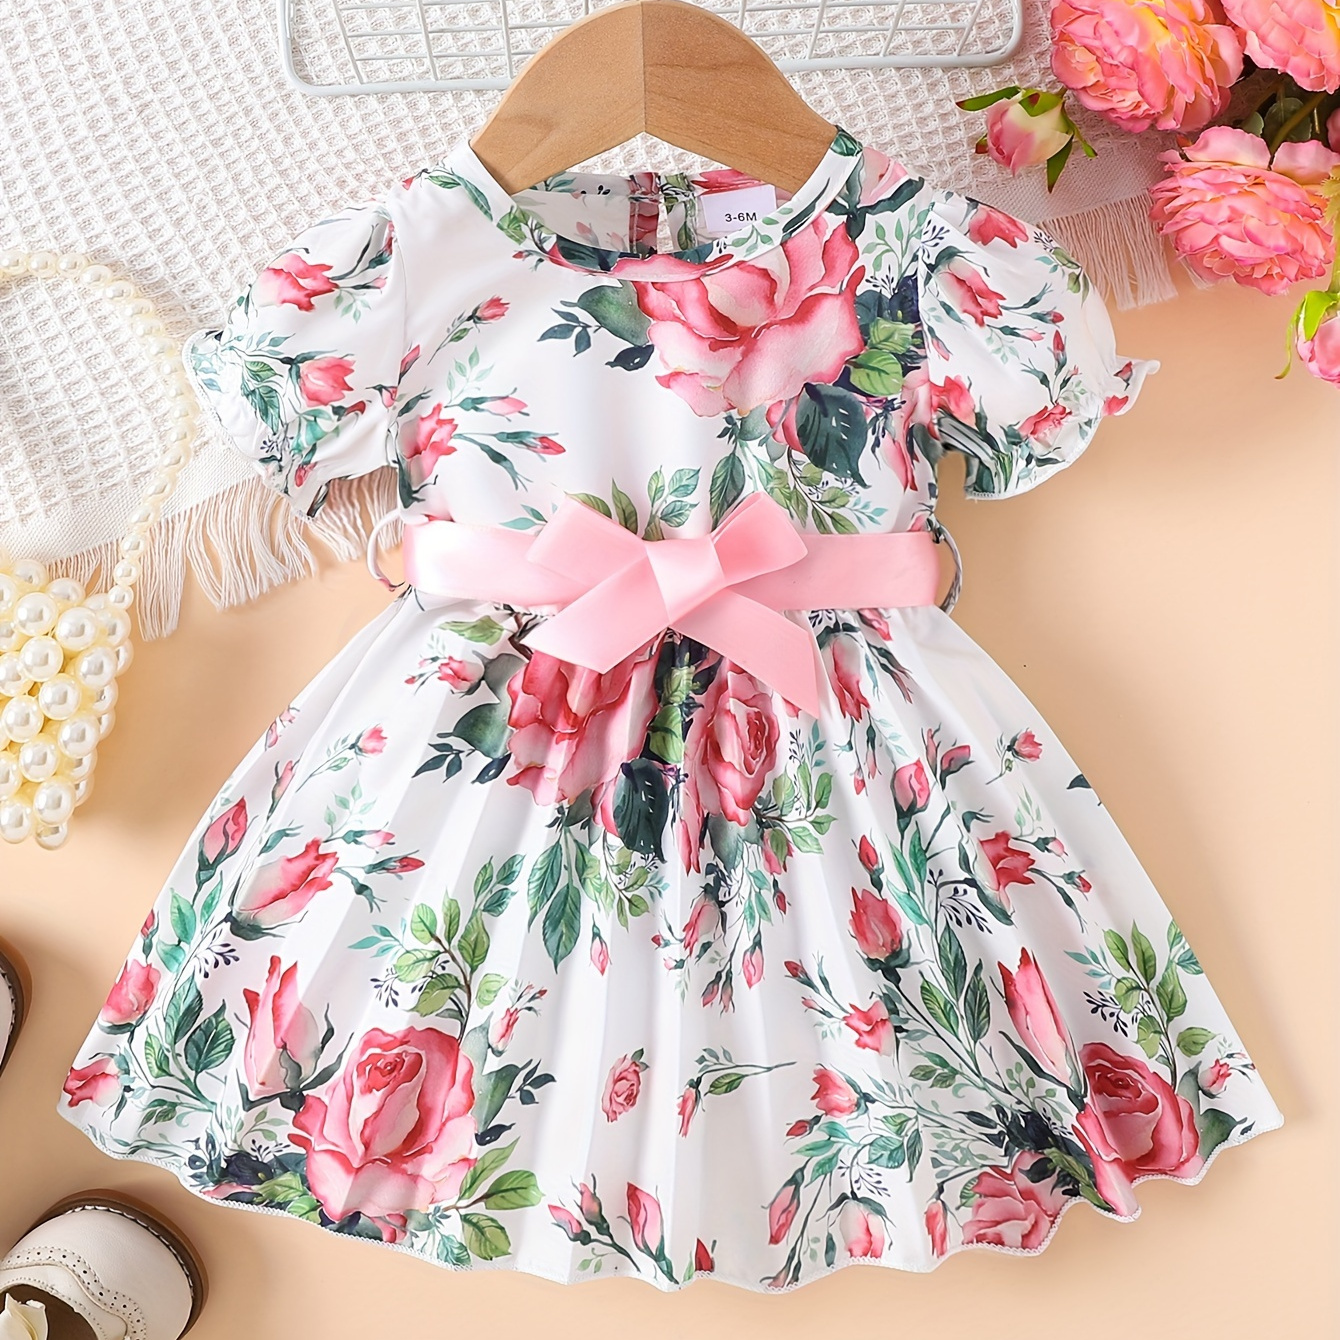 

Toddler Baby Girl Dress Costume Dress, Summer Lantern Sleeve Pleated Skirt Swing Baby Dress With Bow Belt, Full Print Floral Dress Simple Breathable Comfortable Cute Baby Girls Clothing